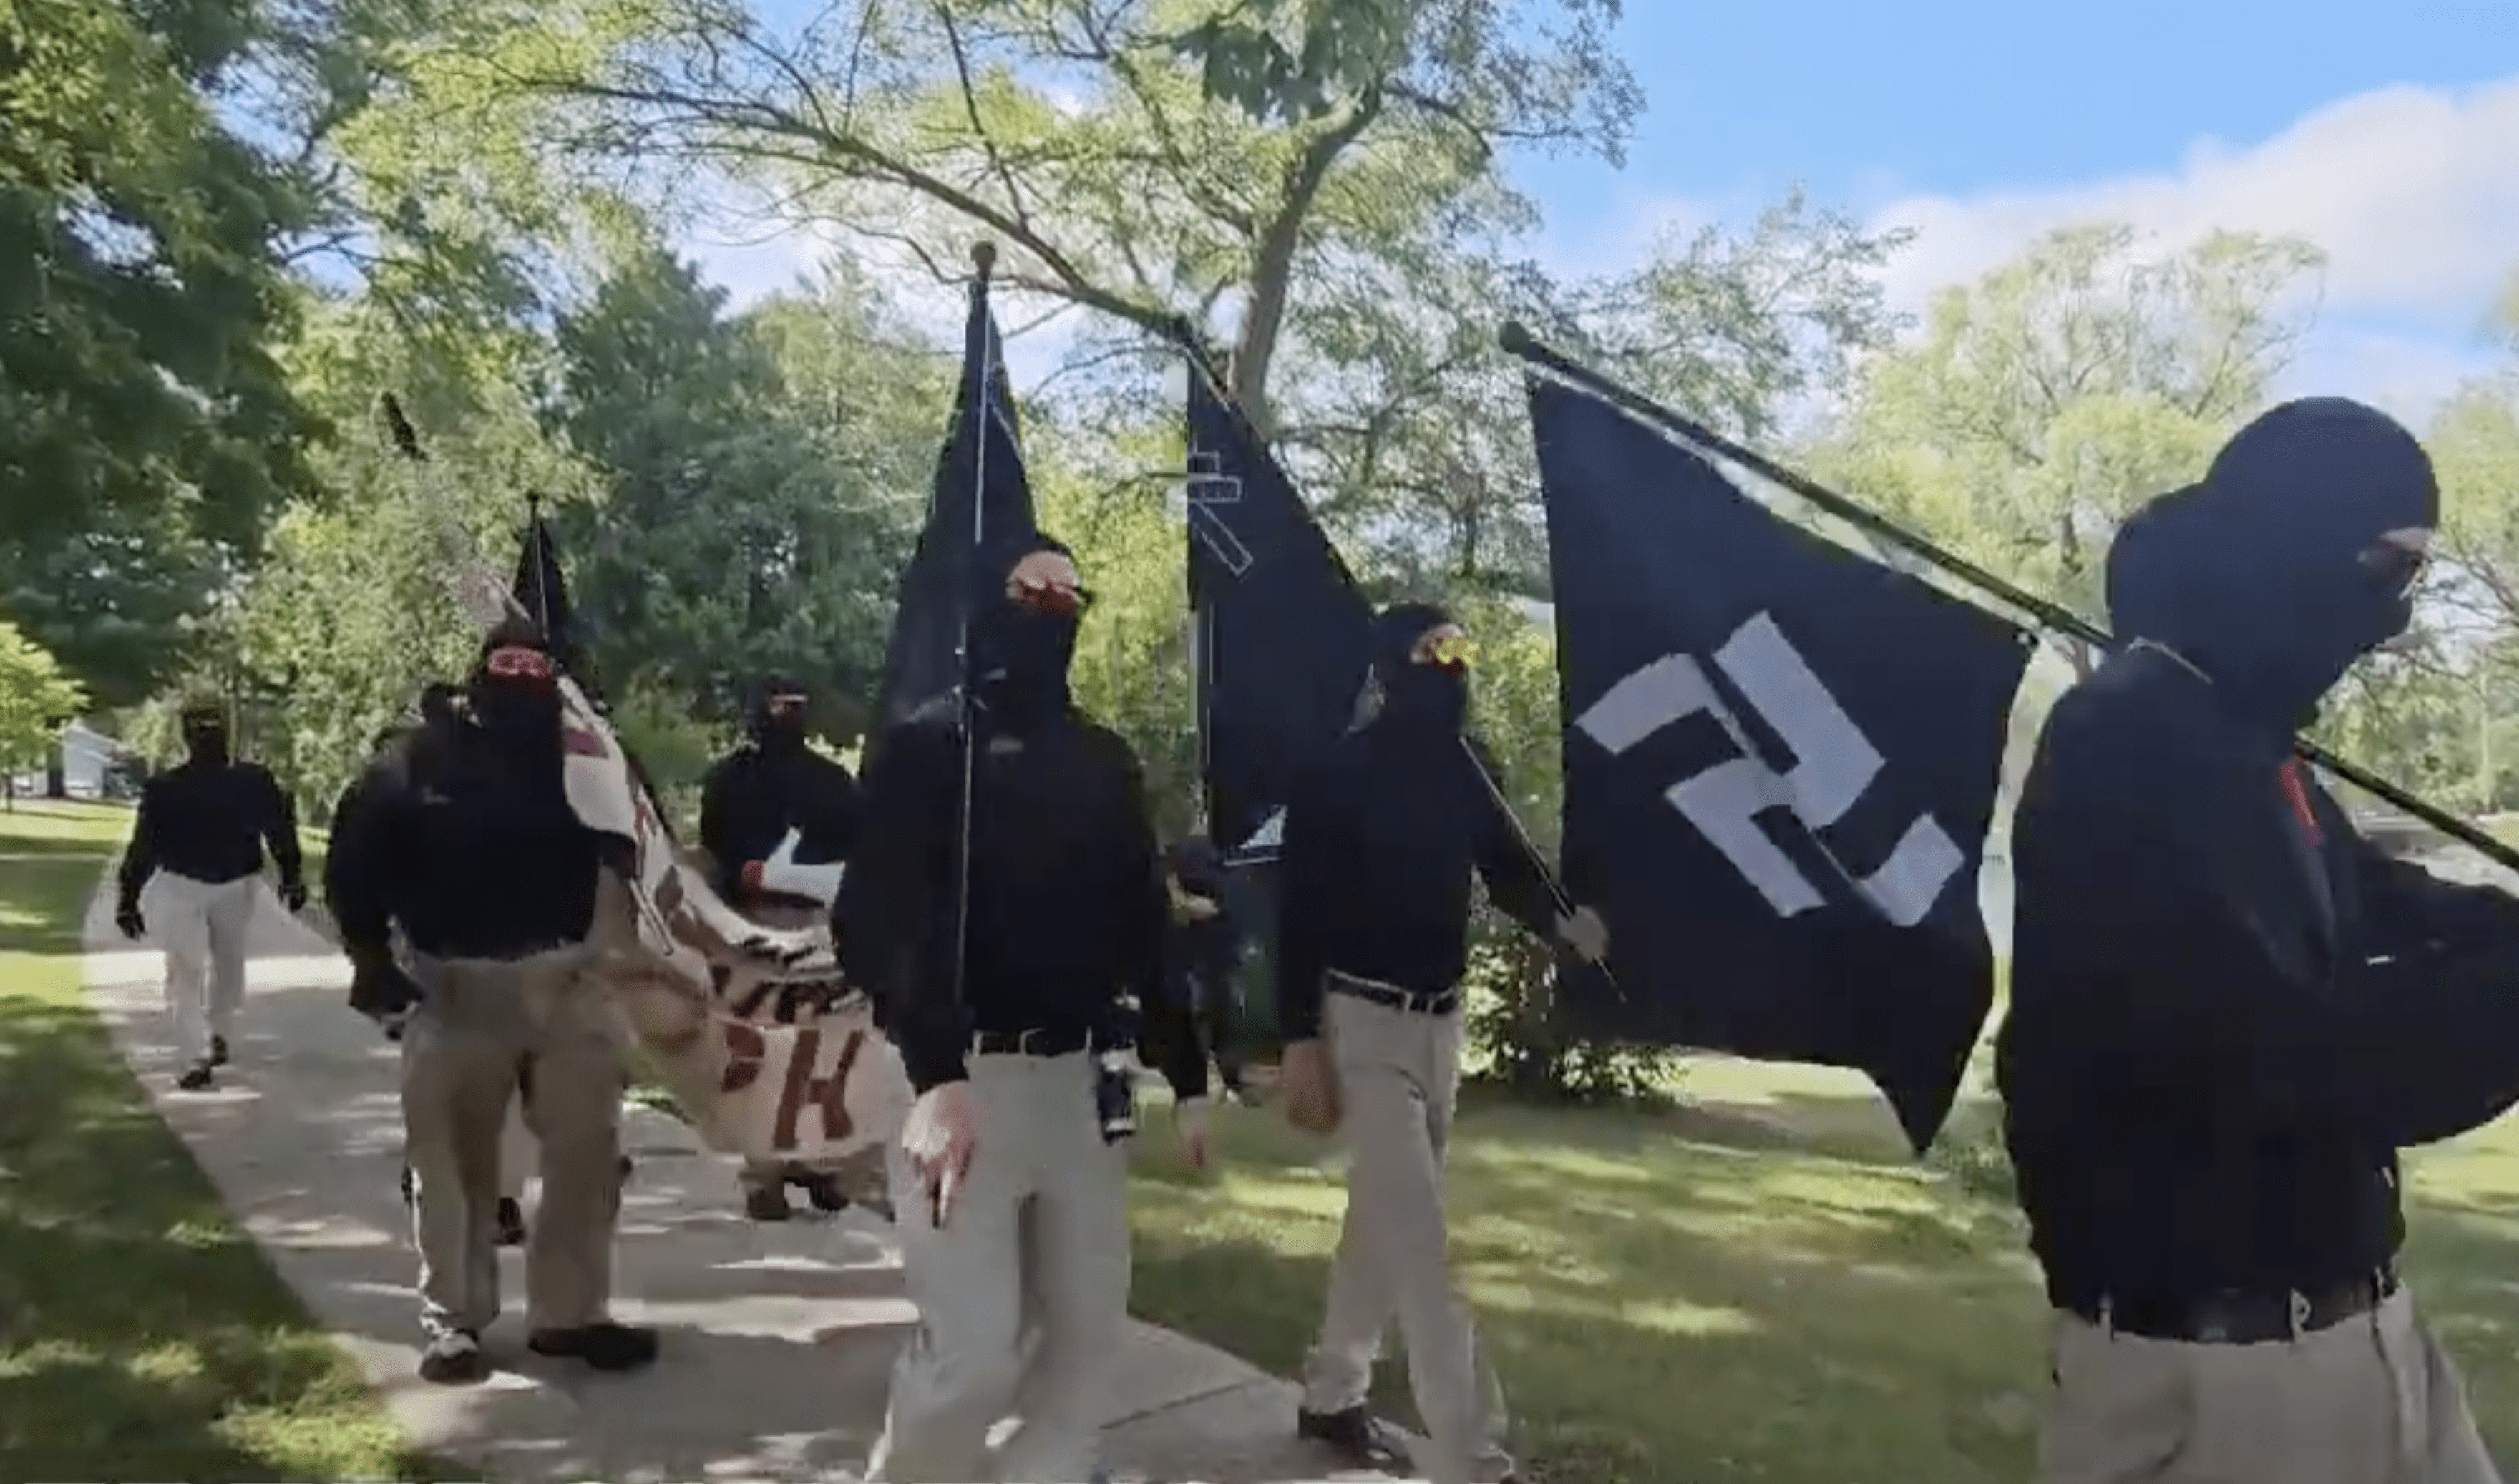 Rebranding? – New Neo-Nazi Group “Blood Tribe” Stages Armed Protest with Swastika Flags at LGBT Pride Event in Wisconsin (VIDEO)